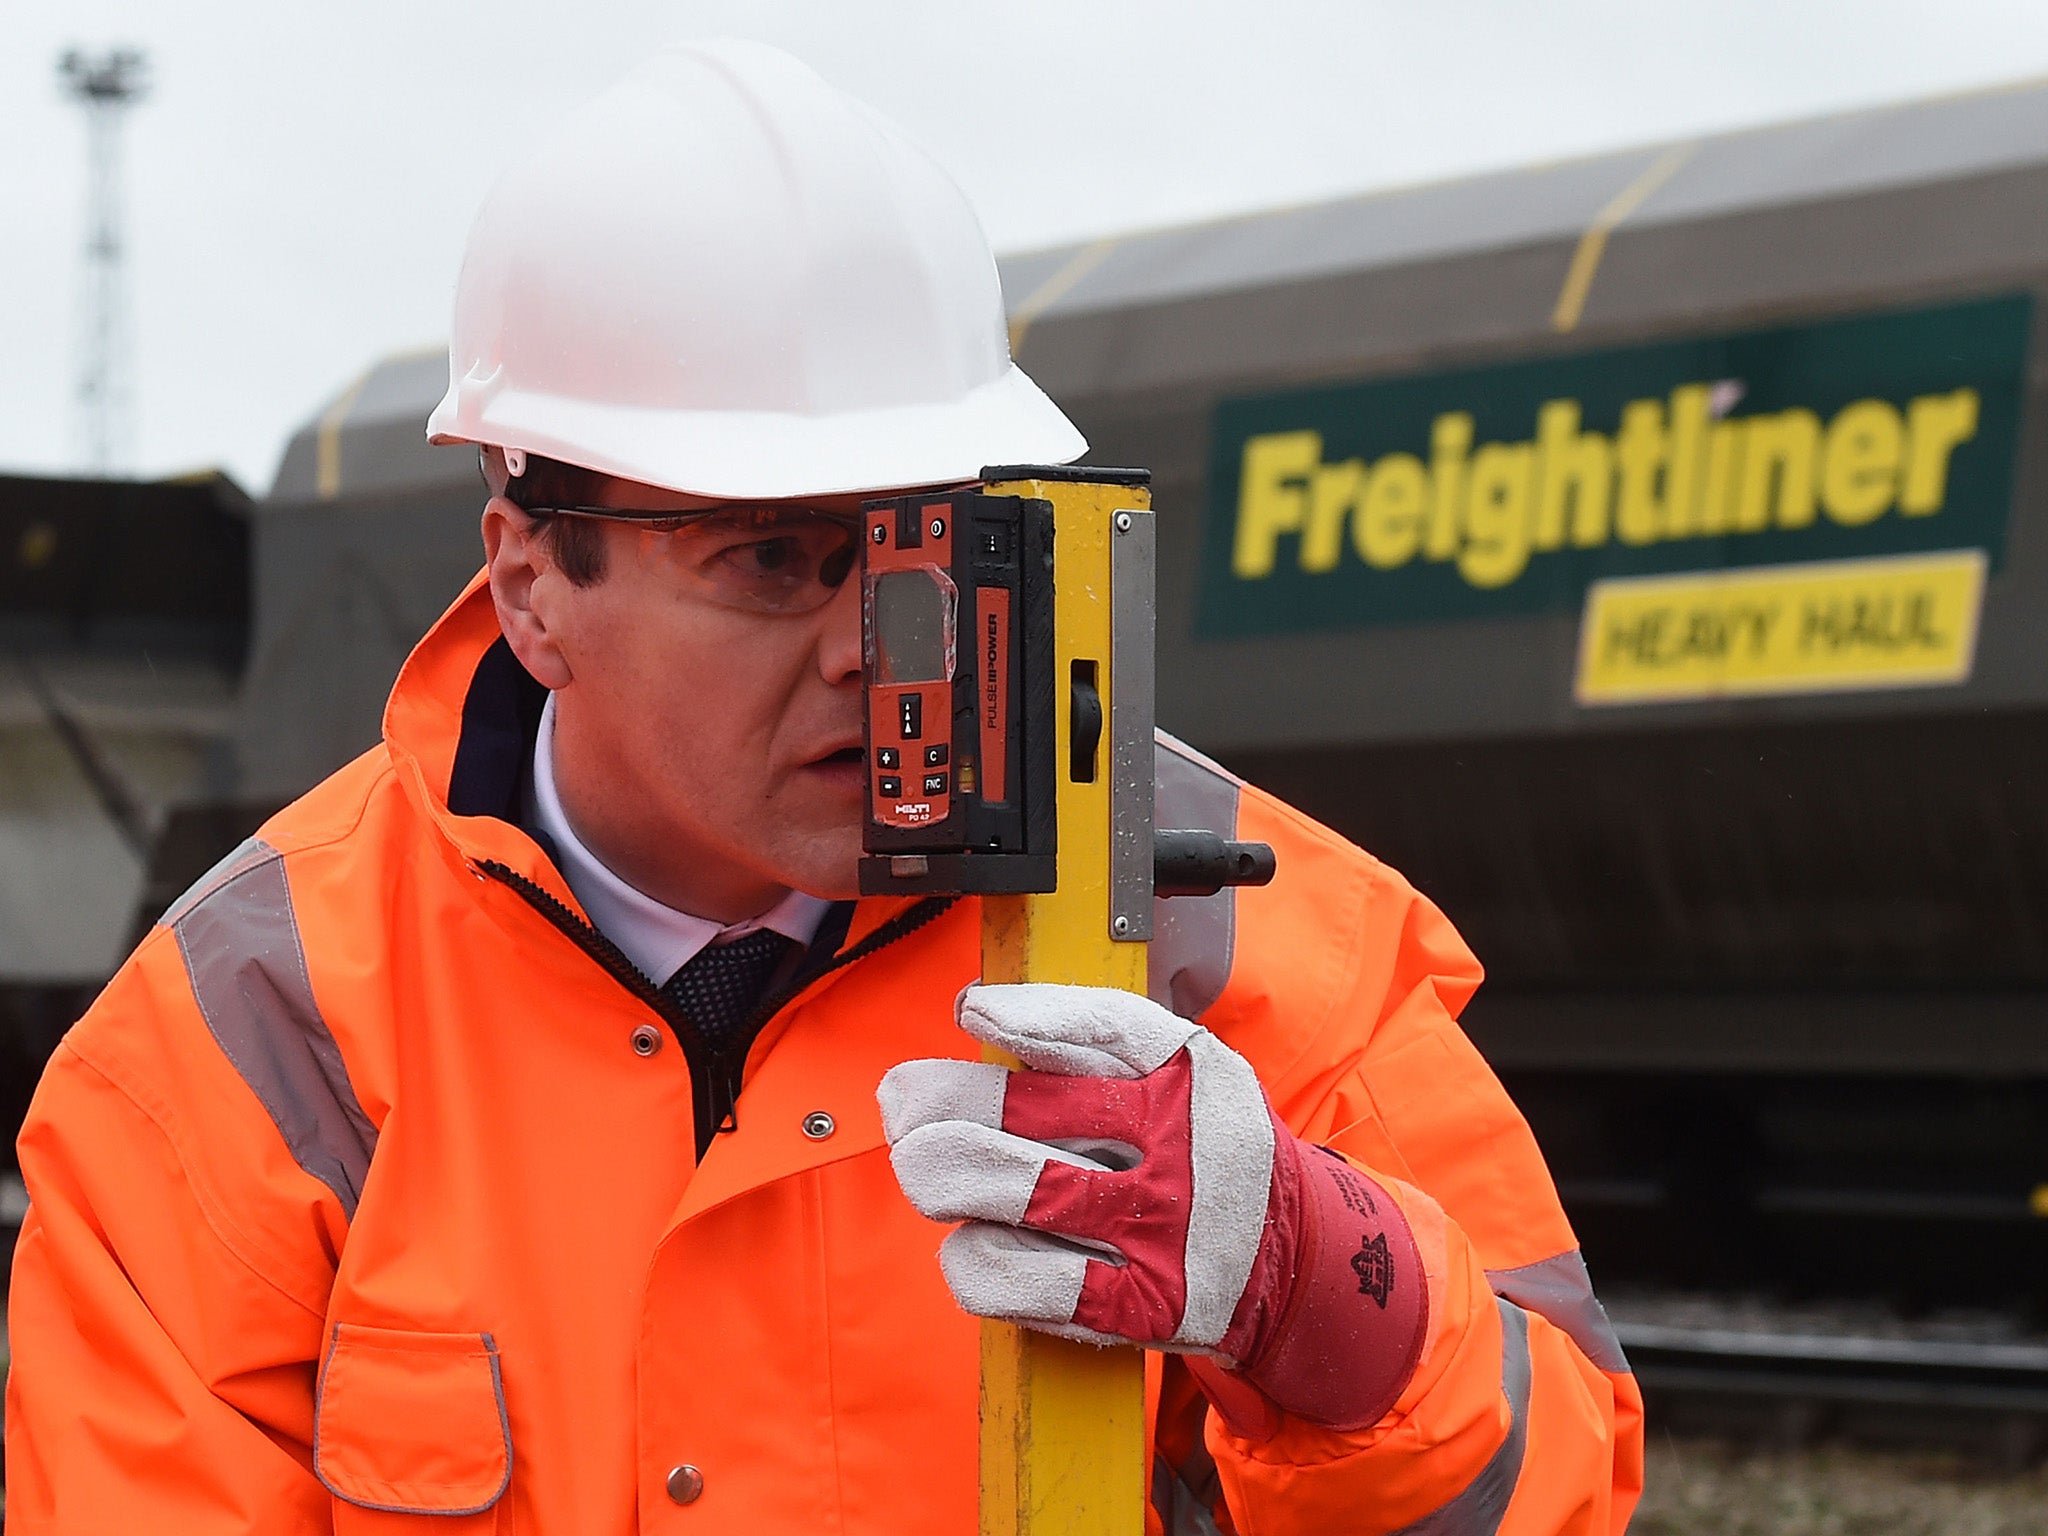 Osborne announced his support for HS3, following visits to Crewe Freight liner haul in November